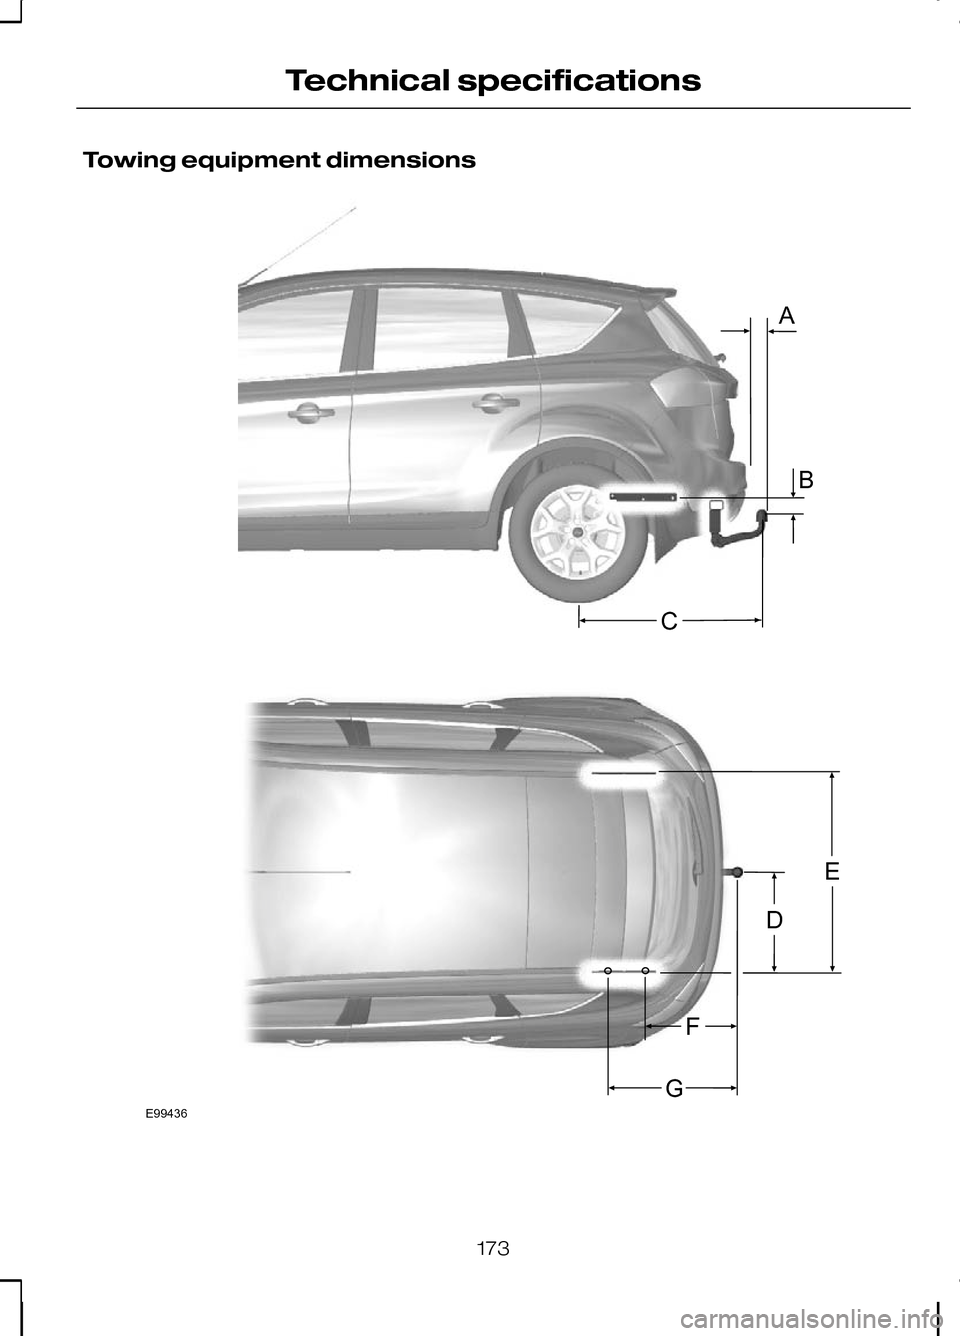 FORD KUGA 2010 1.G Owners Manual Towing equipment dimensions
173
Technical specificationsABGFECDE99436  